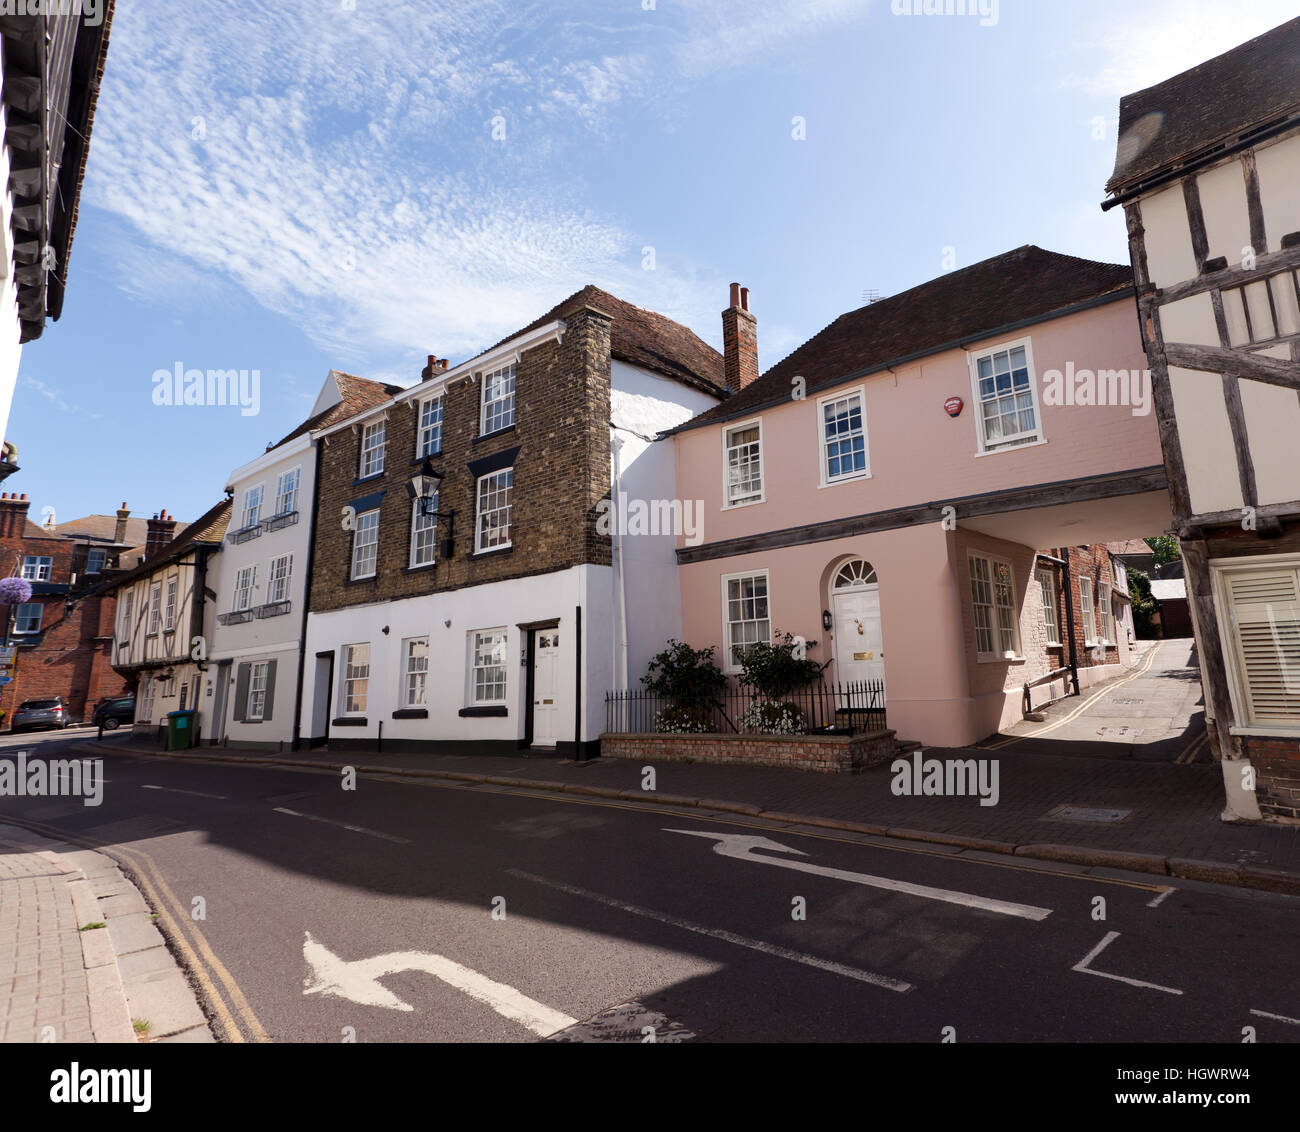 View along  Strand Street,Sandwich, Kent, showing some of the many lised period buildings in this historic old town. Stock Photo